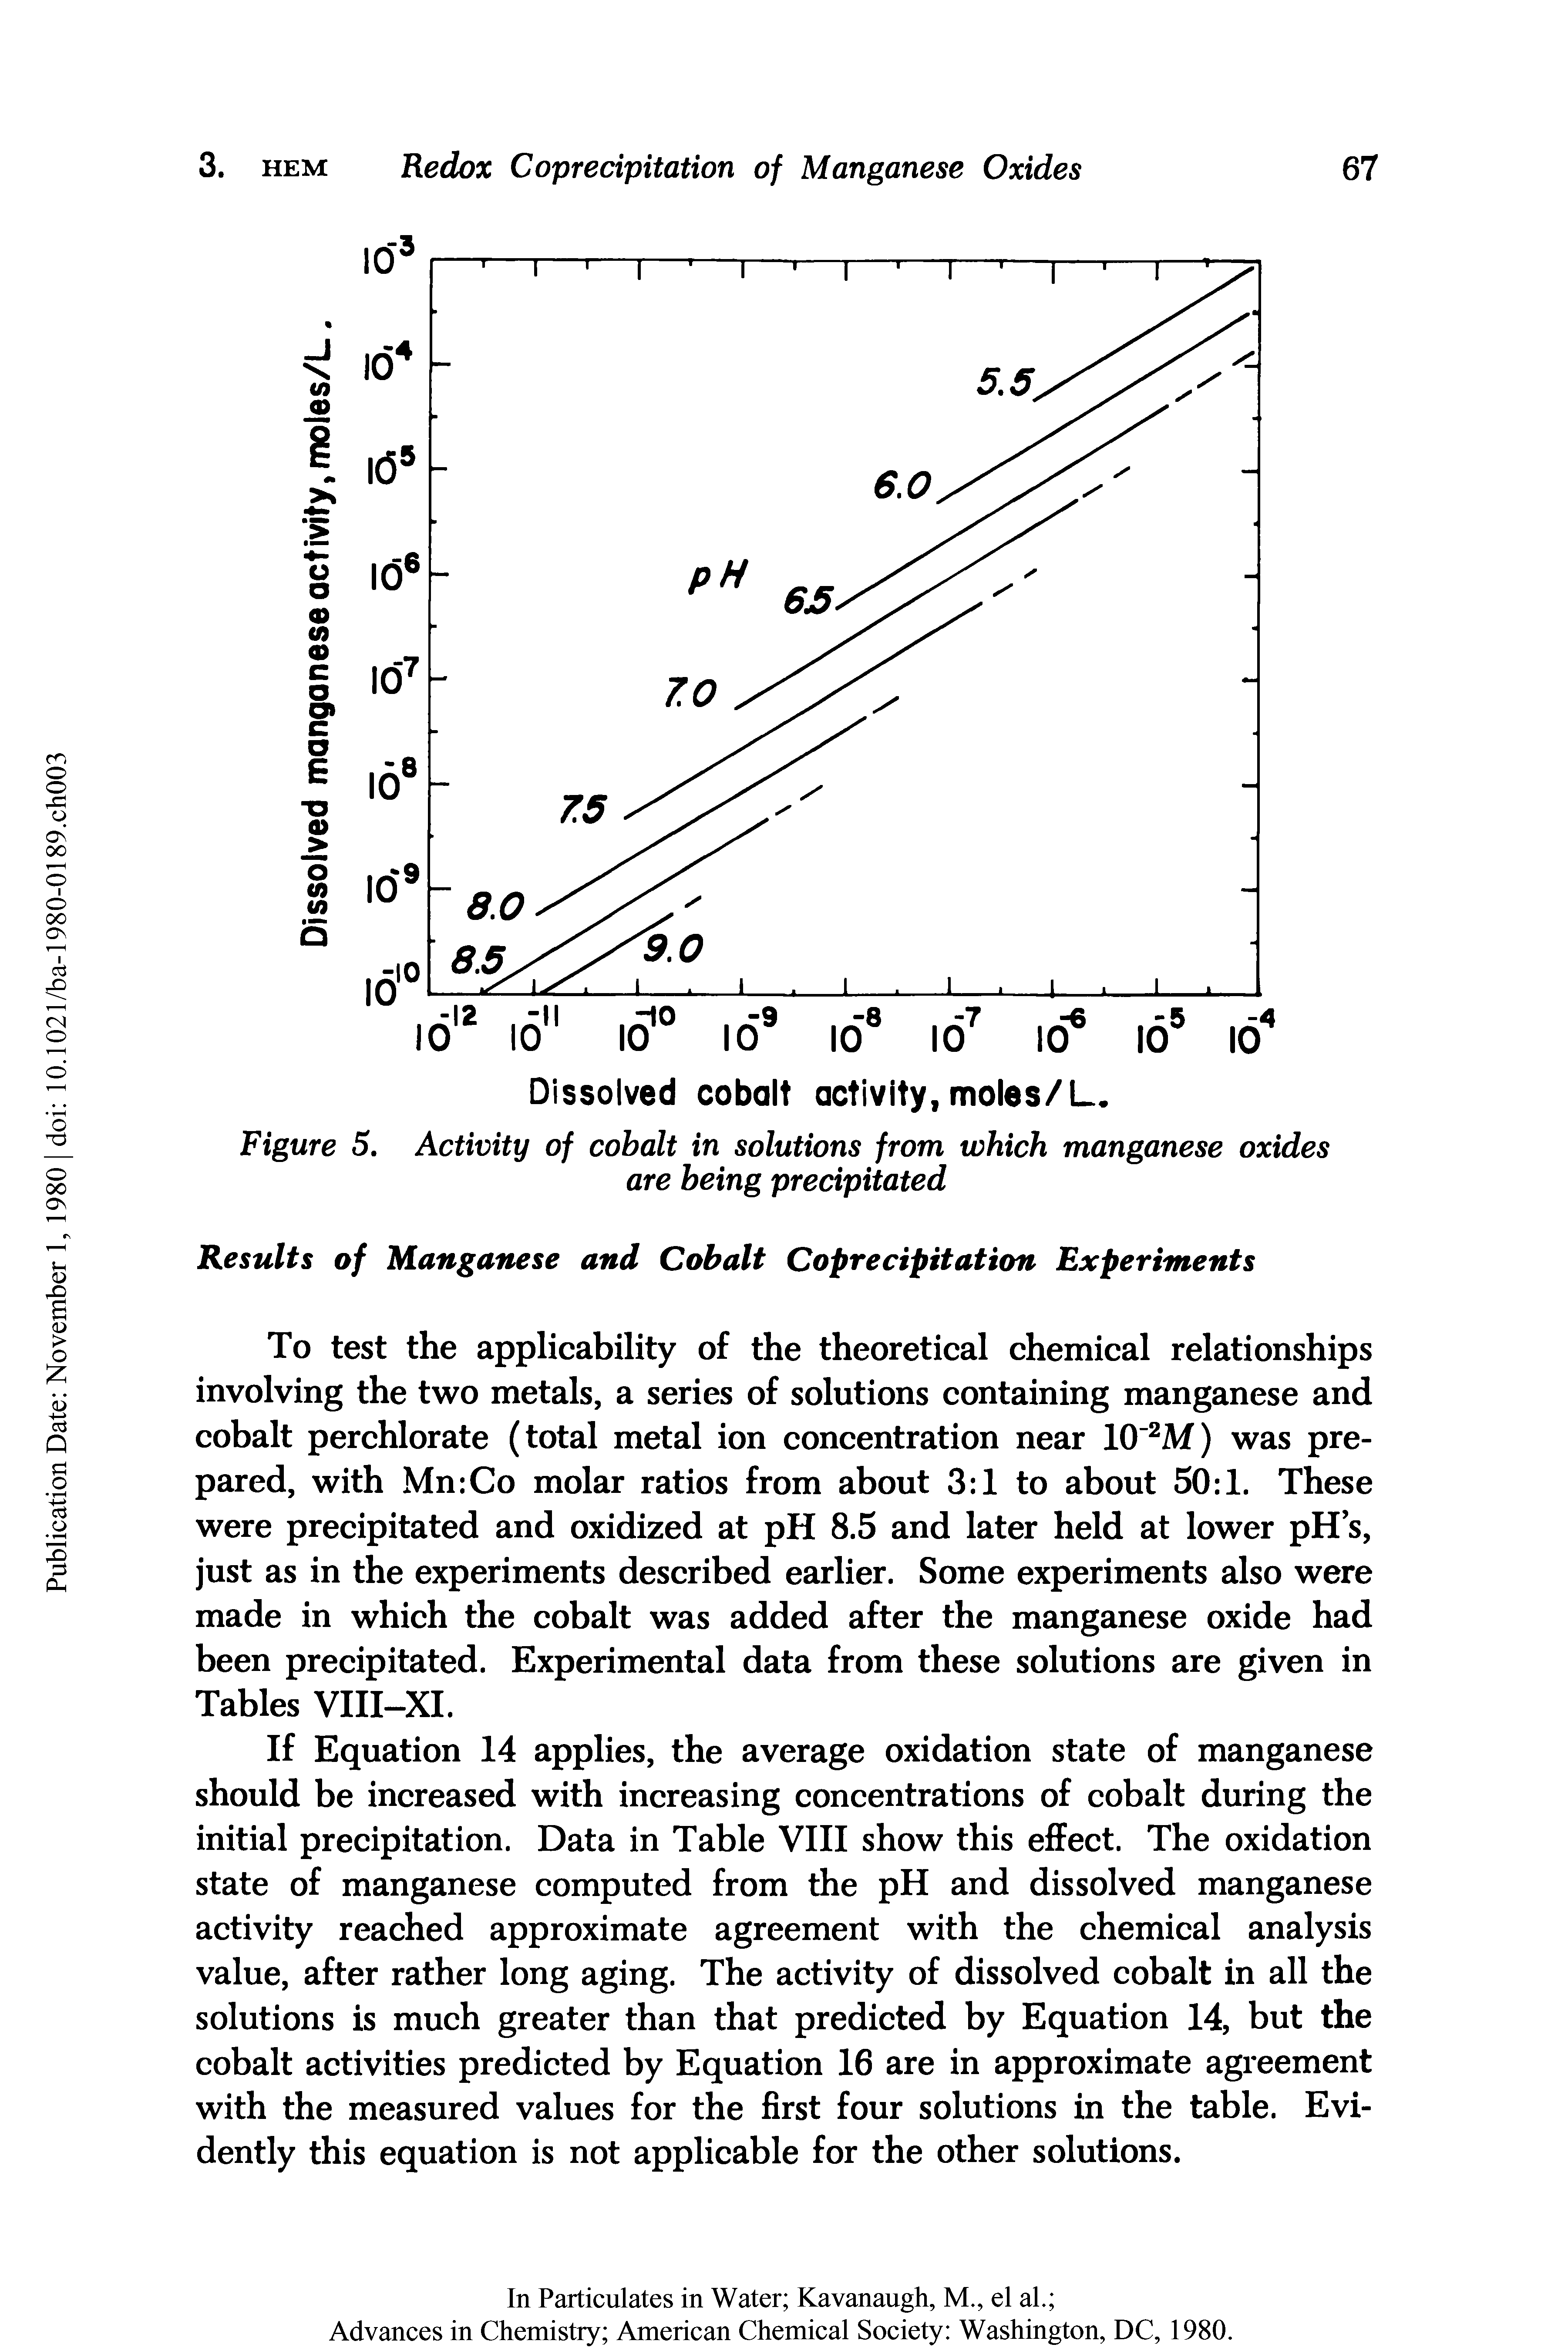 Figure 5. Activity of cohalt in solutions from which manganese oxides are being precipitated...